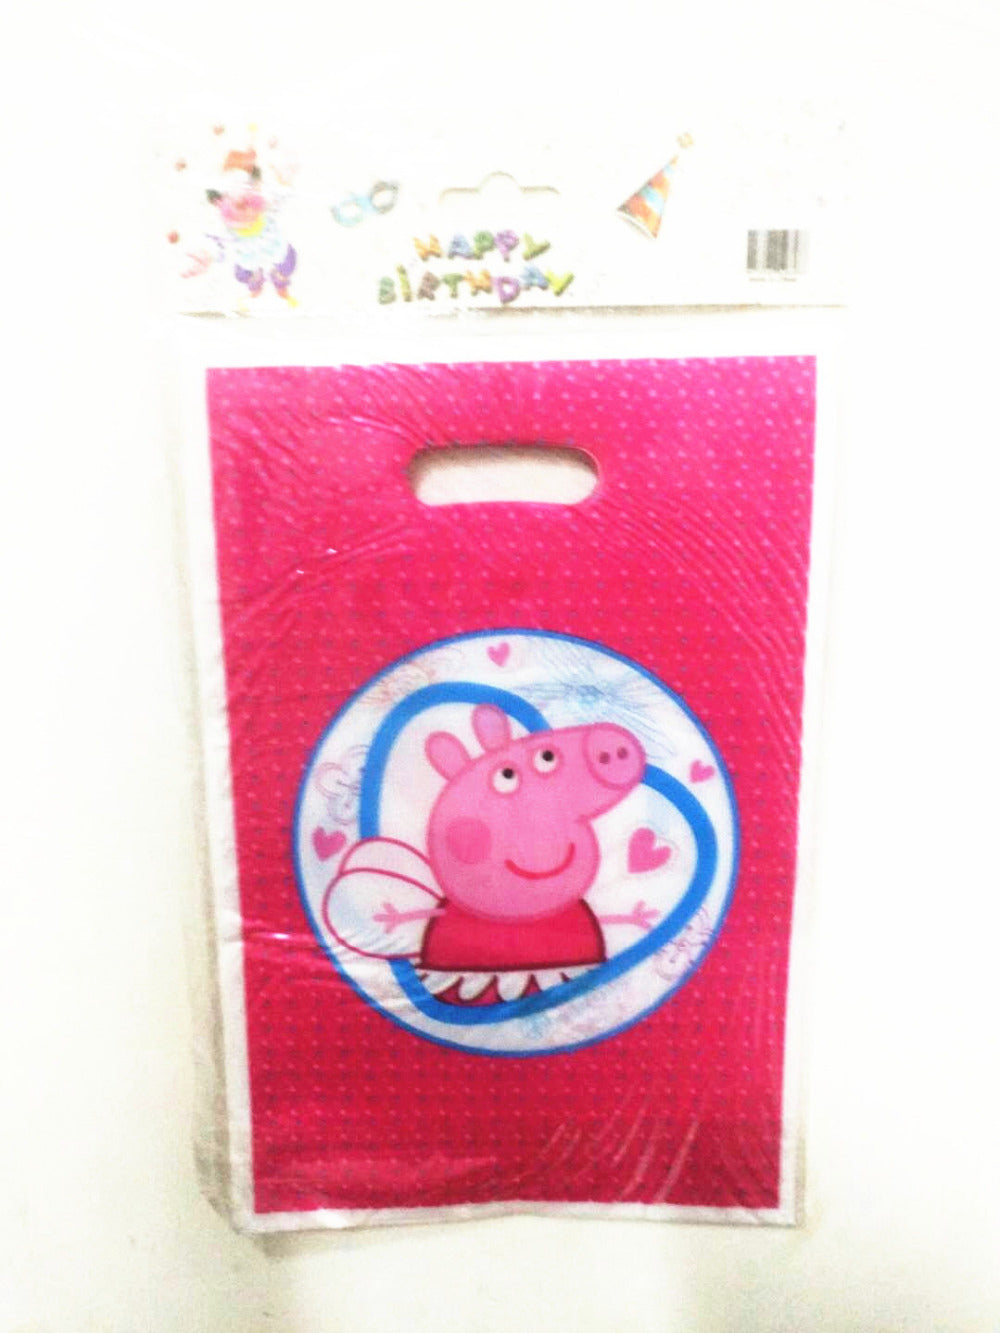 10pcs/lot cartoon peppa pig disposable plastic gift candy bag kids birthday party supplies baby shower loot bags about 16*26cm - 64 Corp